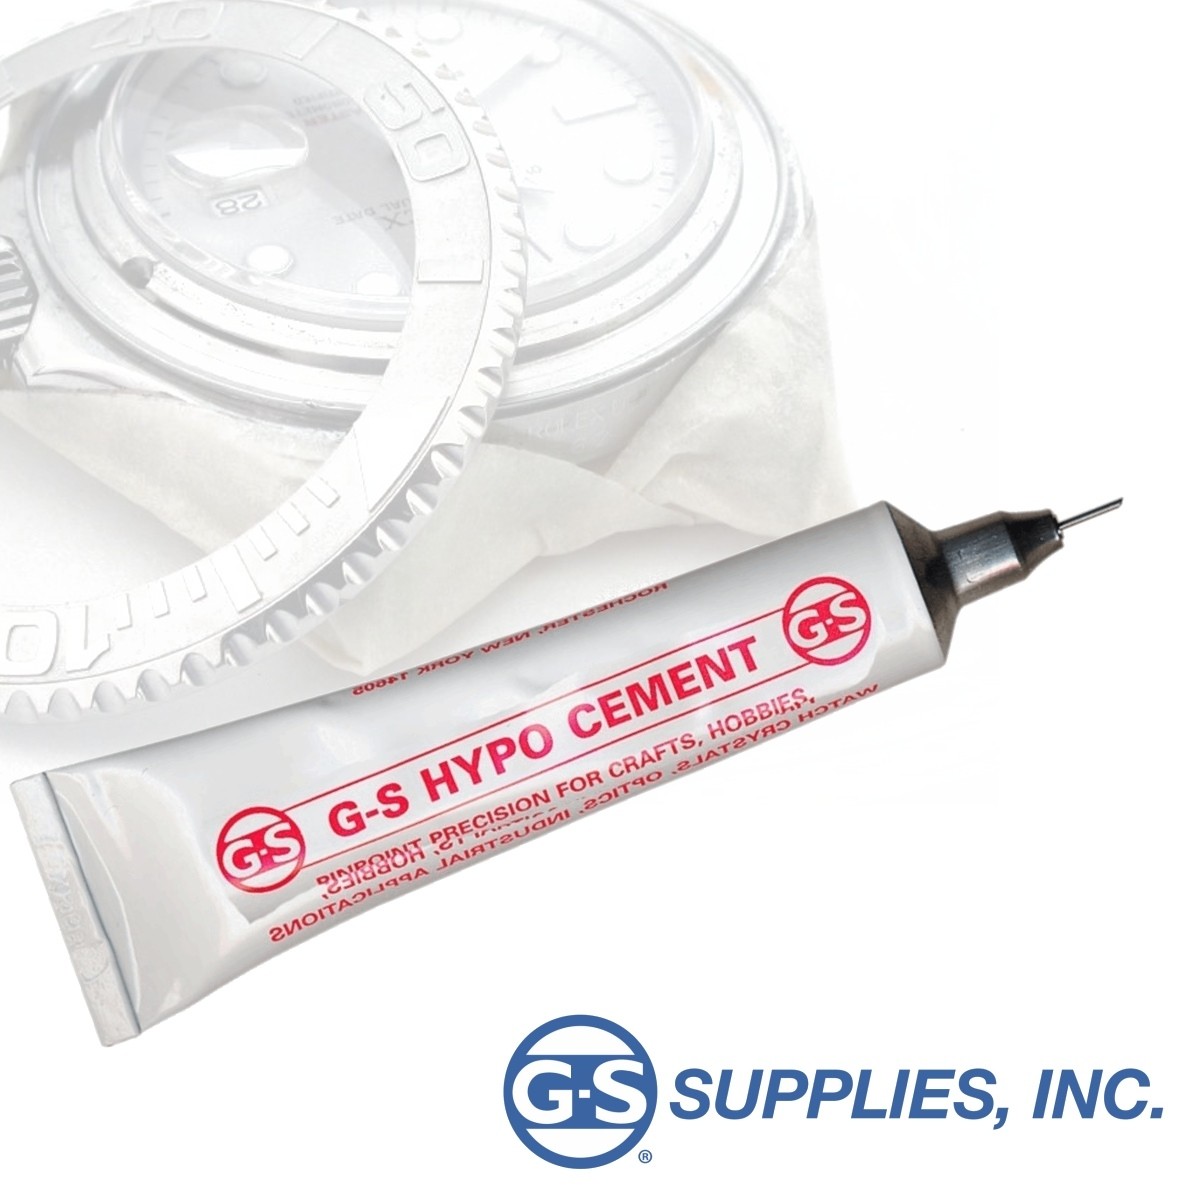 Jewelers GS Hypo Clear Cement 9 ml w/Precision Applicator for Beads  Findings Watch Crystals Plastic Glass Metal Ceramic Crafts